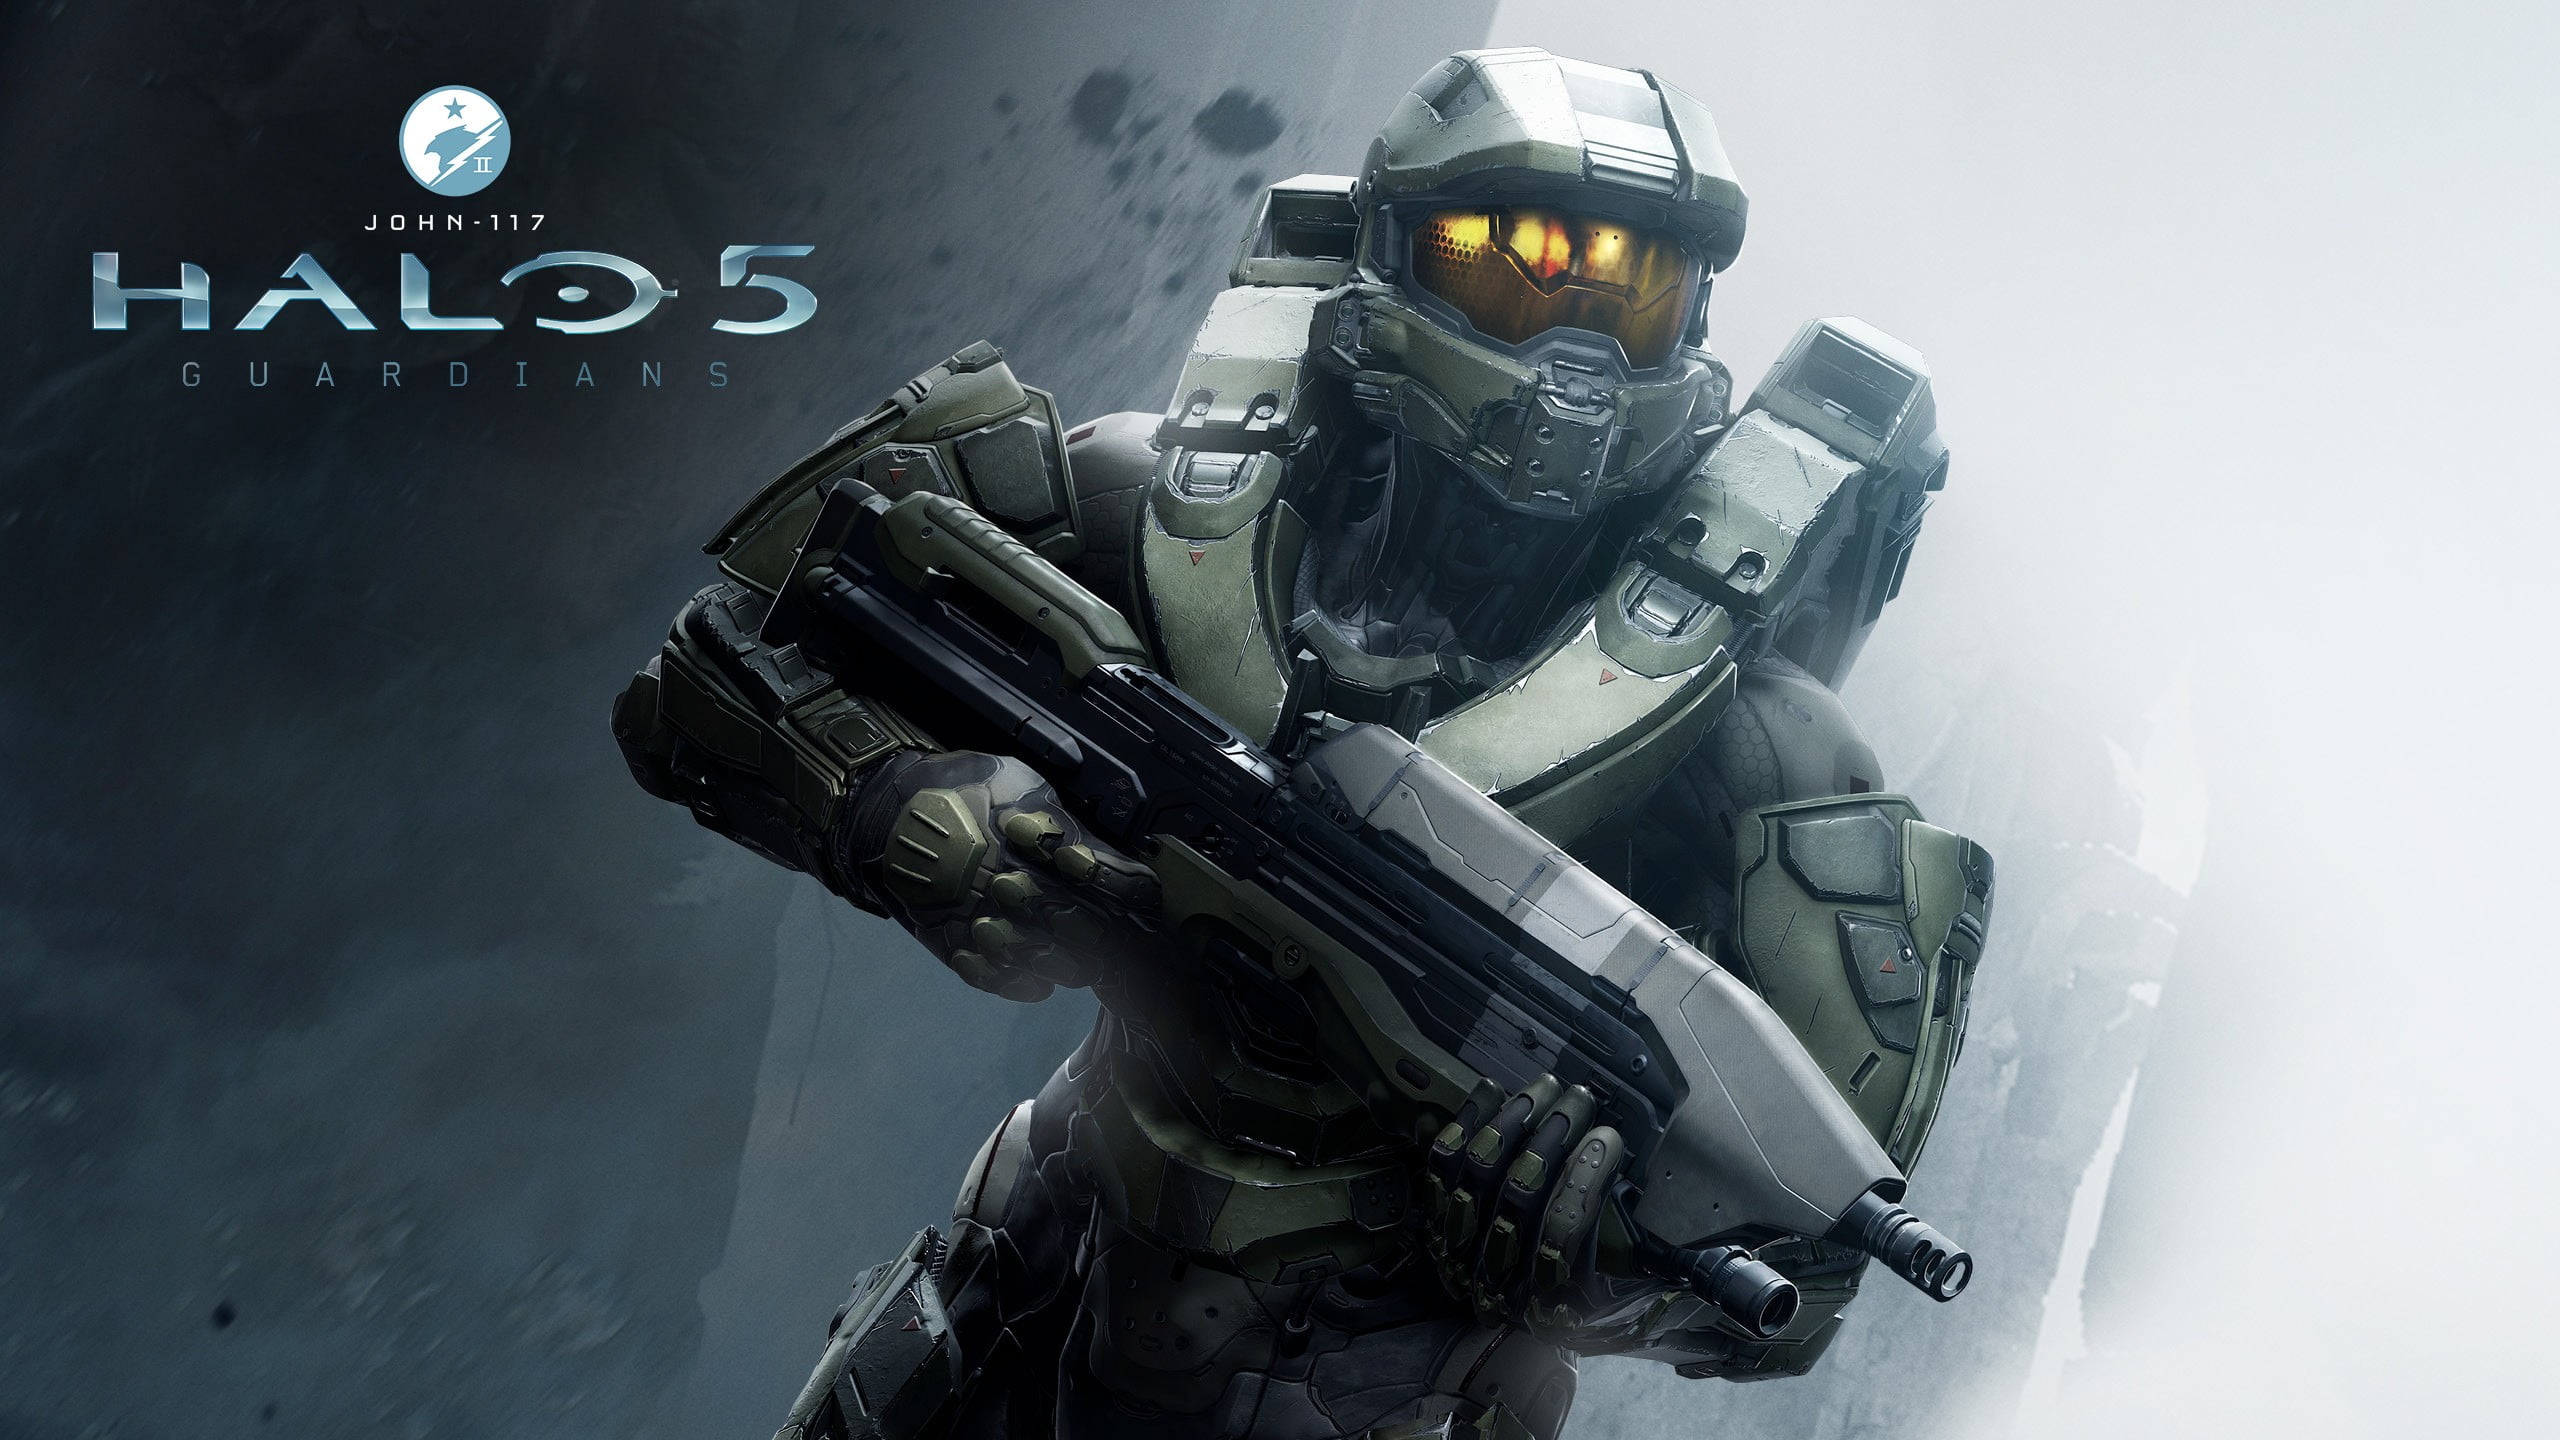 533211 halo 5 guardians artwork video games  Rare Gallery HD Wallpapers